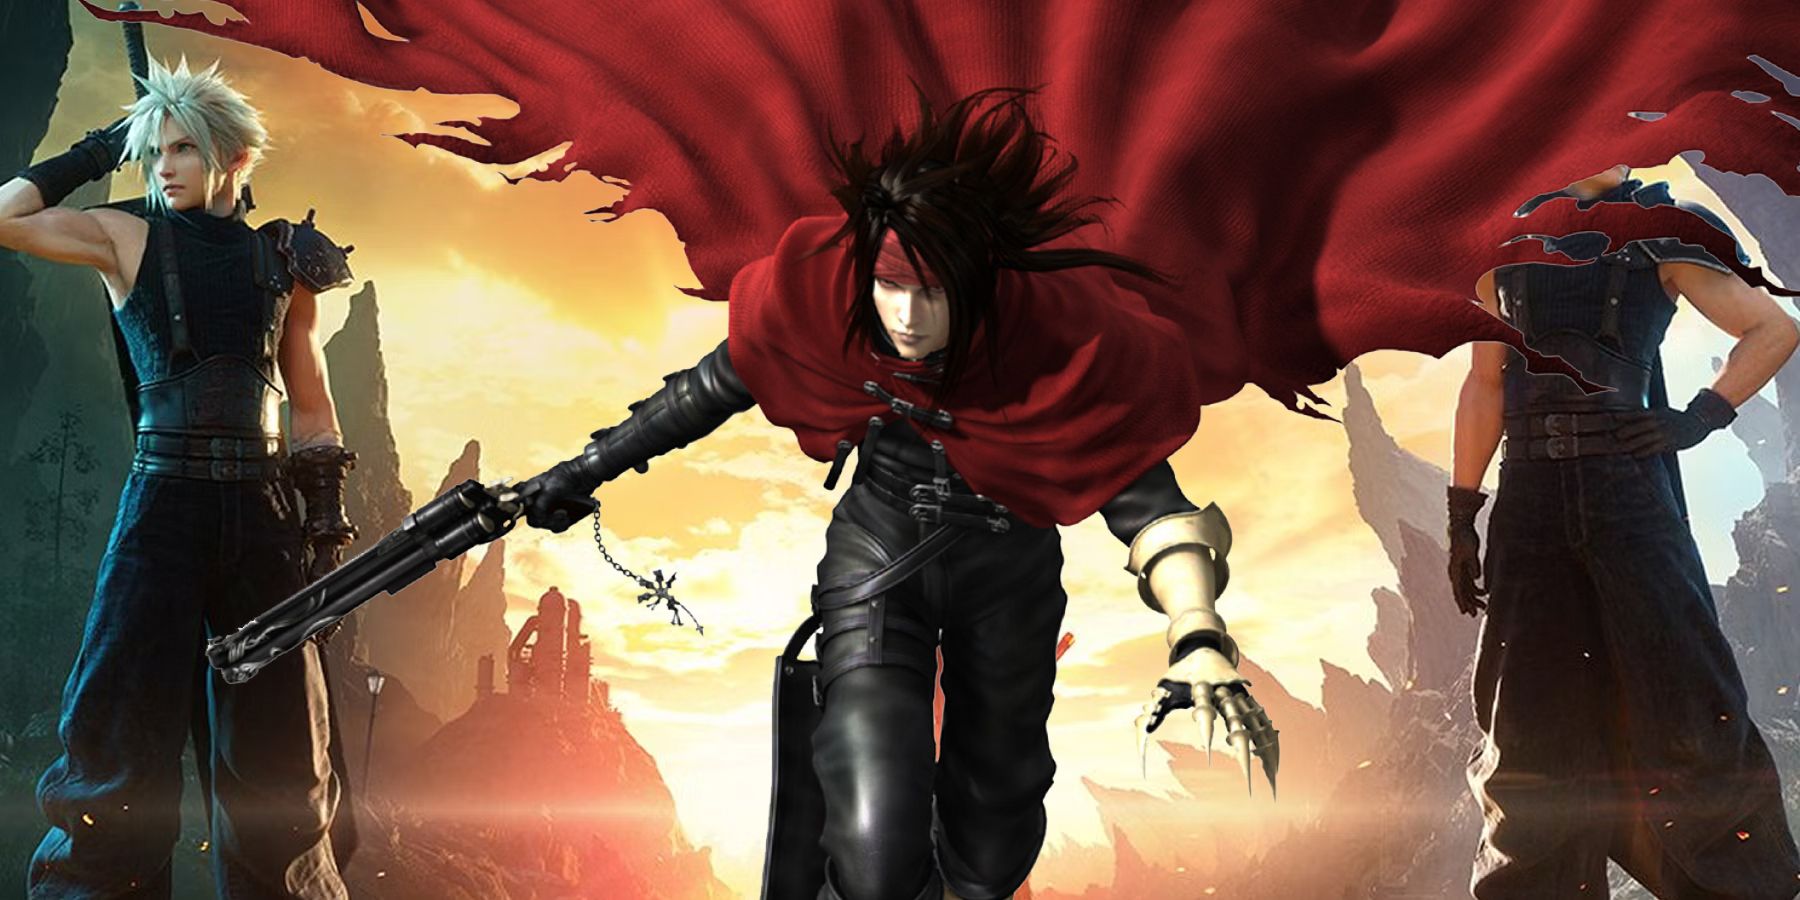 A promotional image of Cloud Strife and Zack Fair in Final Fantasy 7 Rebirth, with Vincent Valentine inserted between them.